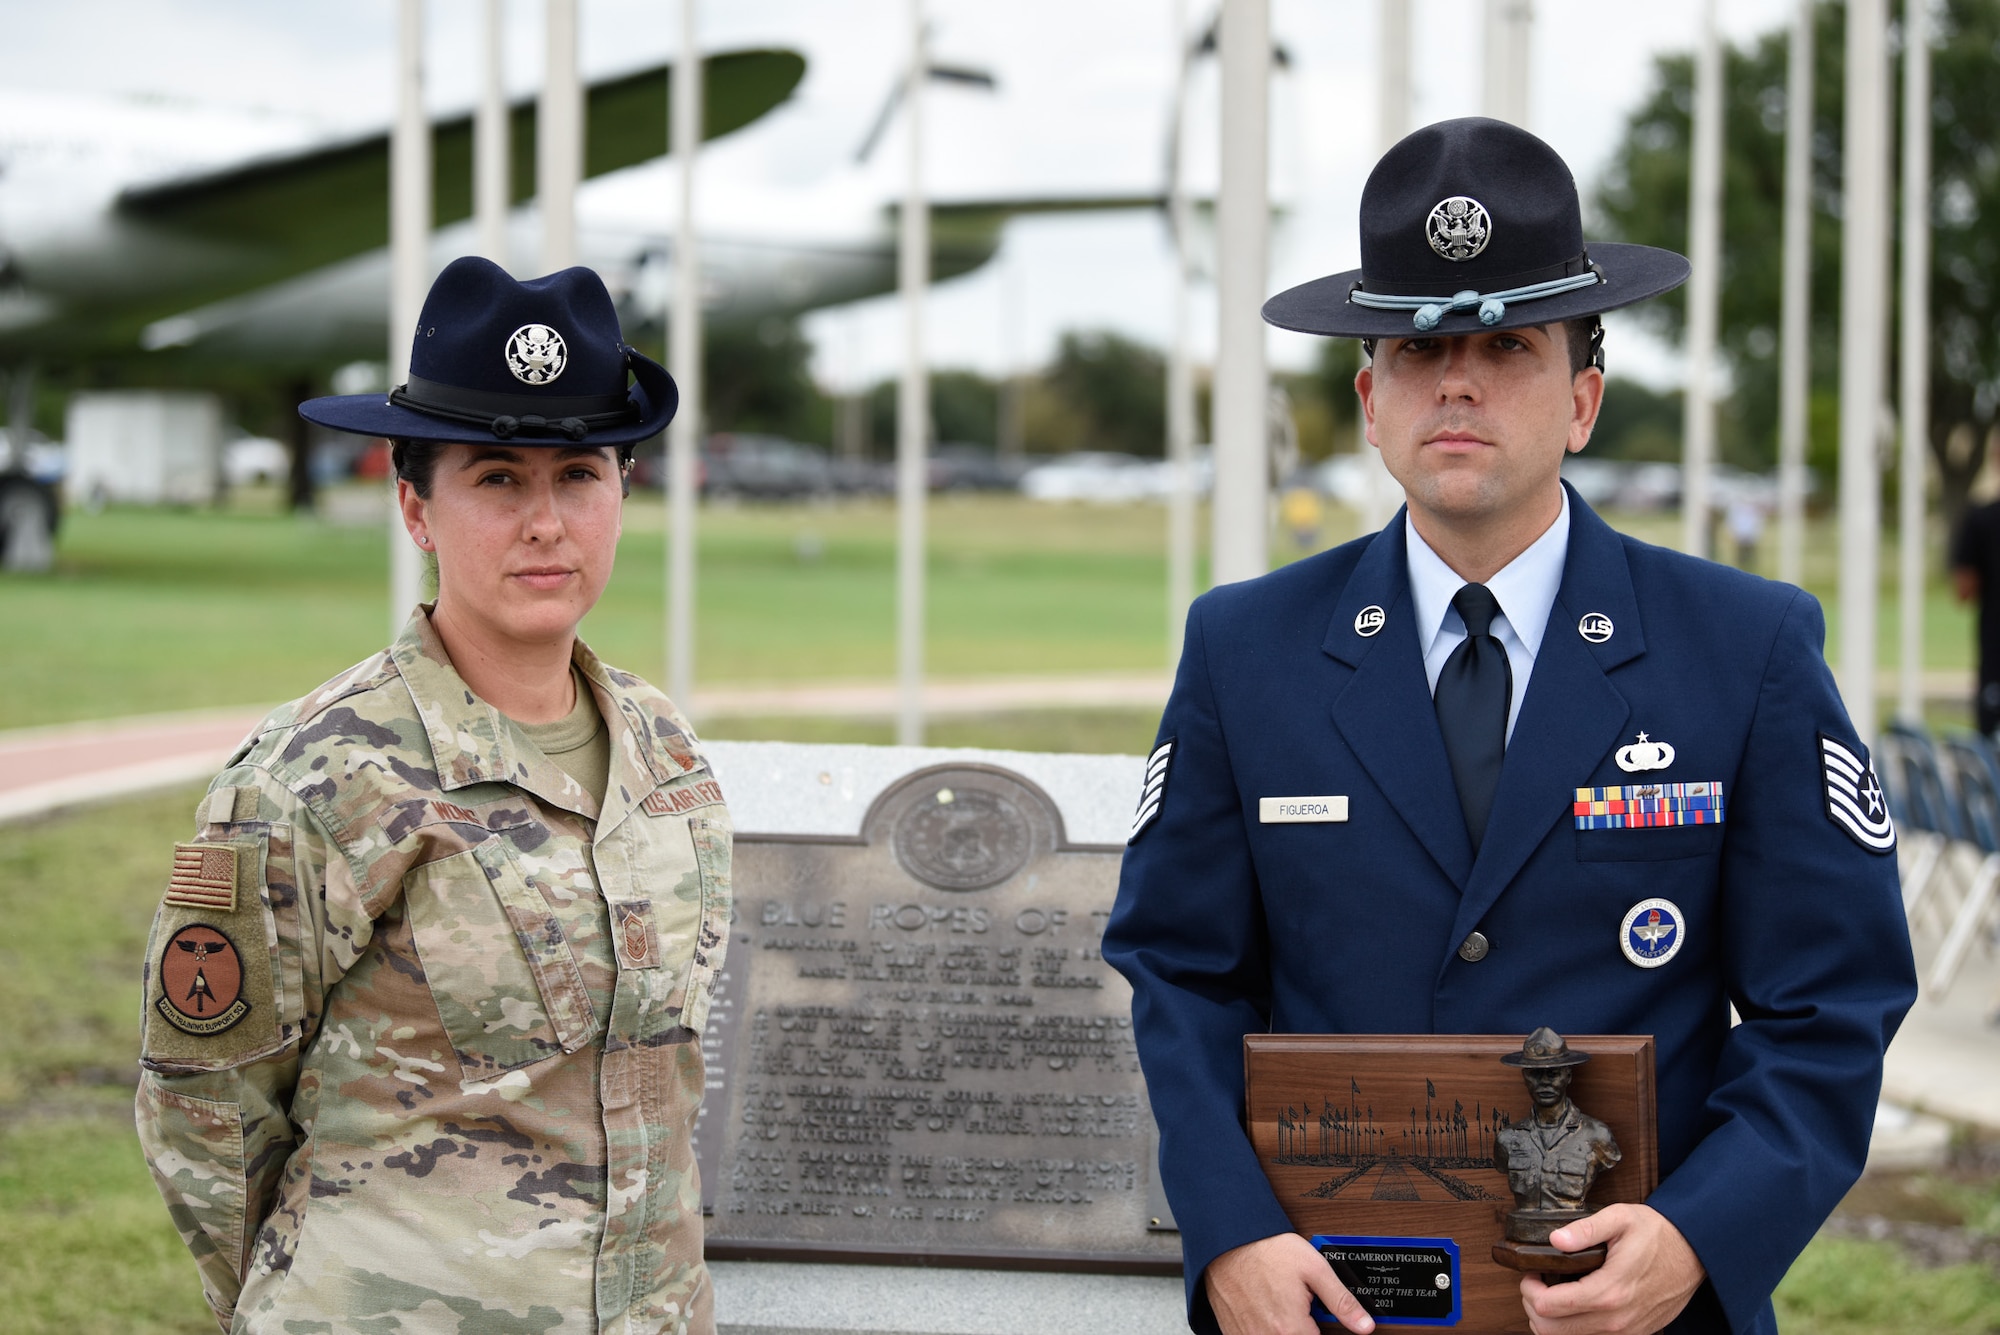 TSgt Figueroa and SMSgt Wong at MTI Monument